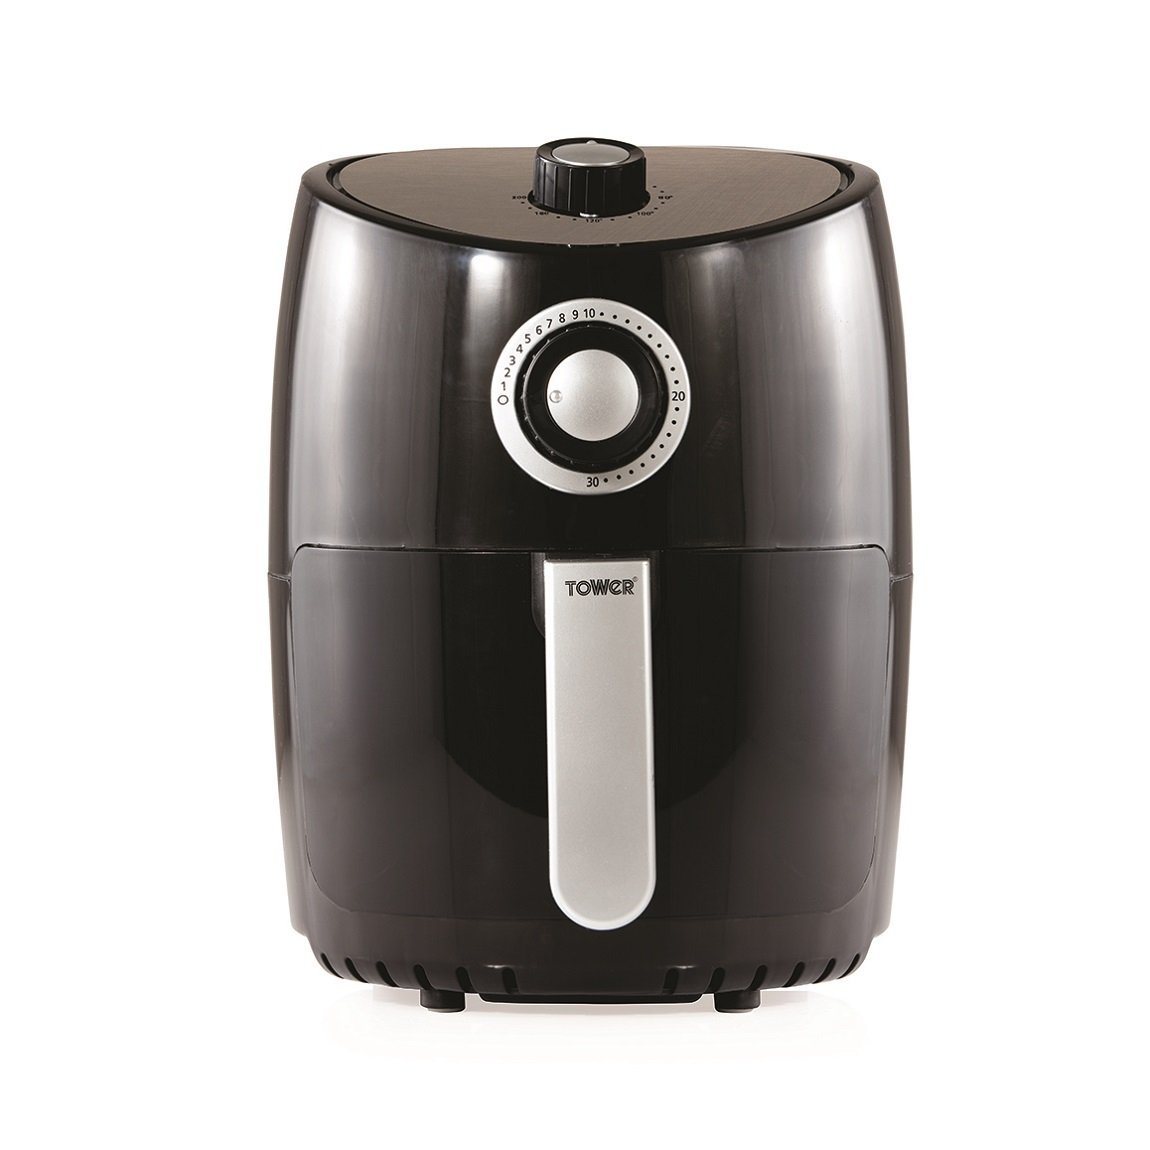 Tower T17023 Air Fryer with 30 Minute Timer, 1000 W, 2 Litre, Black